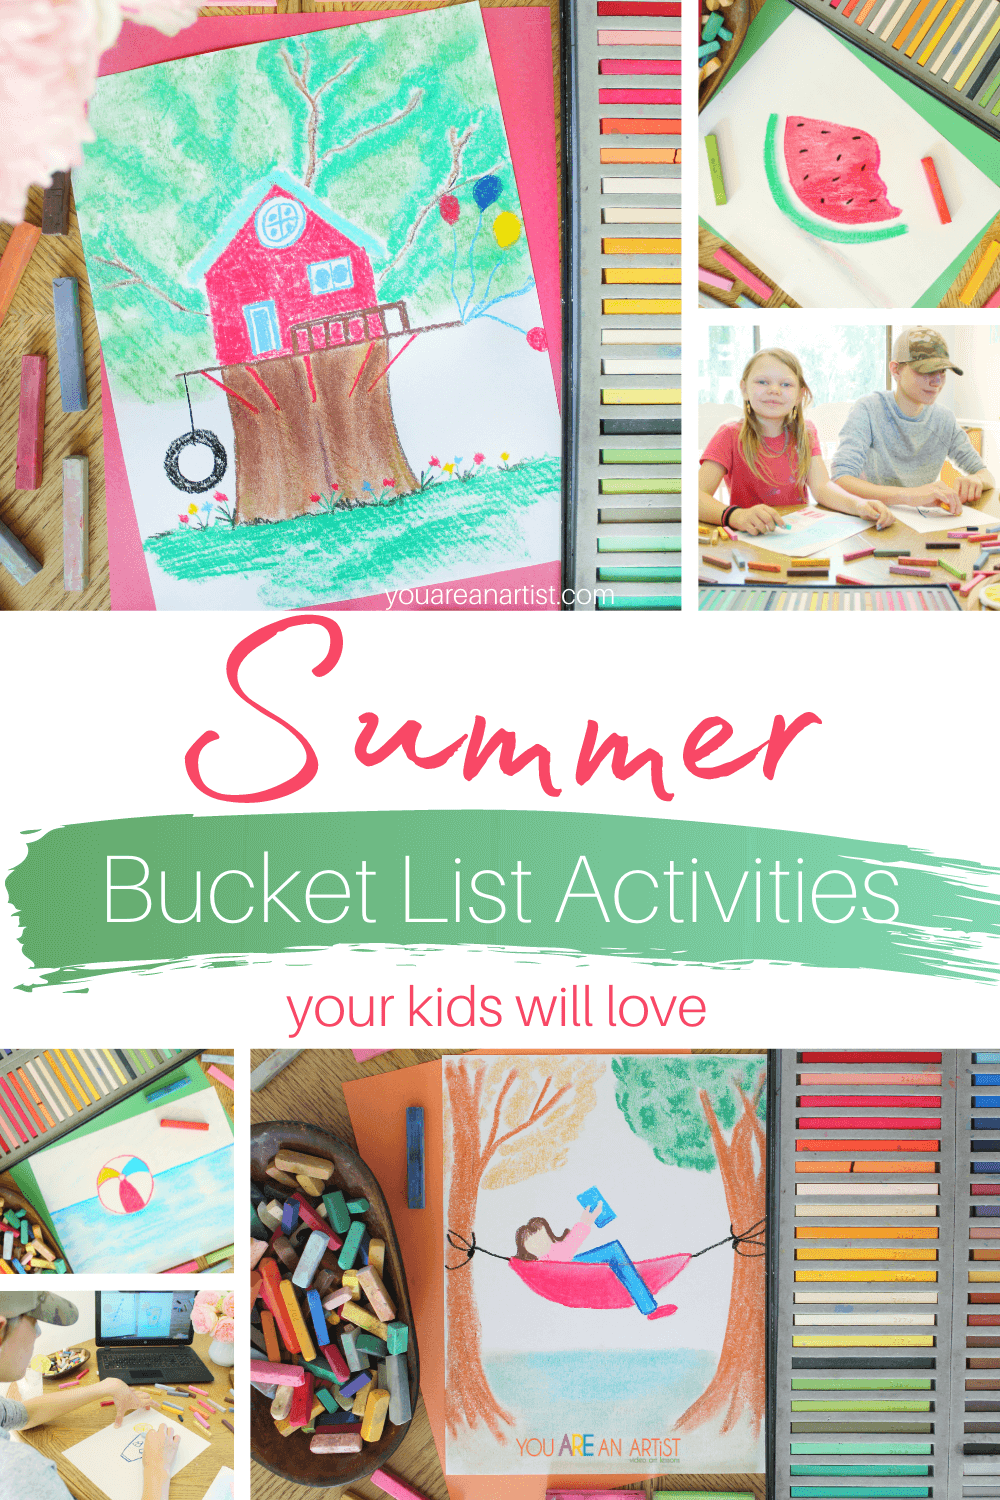 Summer Bucket List Activities Your Kids Will Love:Kick off summer with a summer bucket list of activities your kids will love! You'll need a starter pack of chalk pastels, construction paper, and You ARE An Artist Summer Camp Guide! #summercamp #summerartcamp #summerbucketlist #YouAREAnArtist 